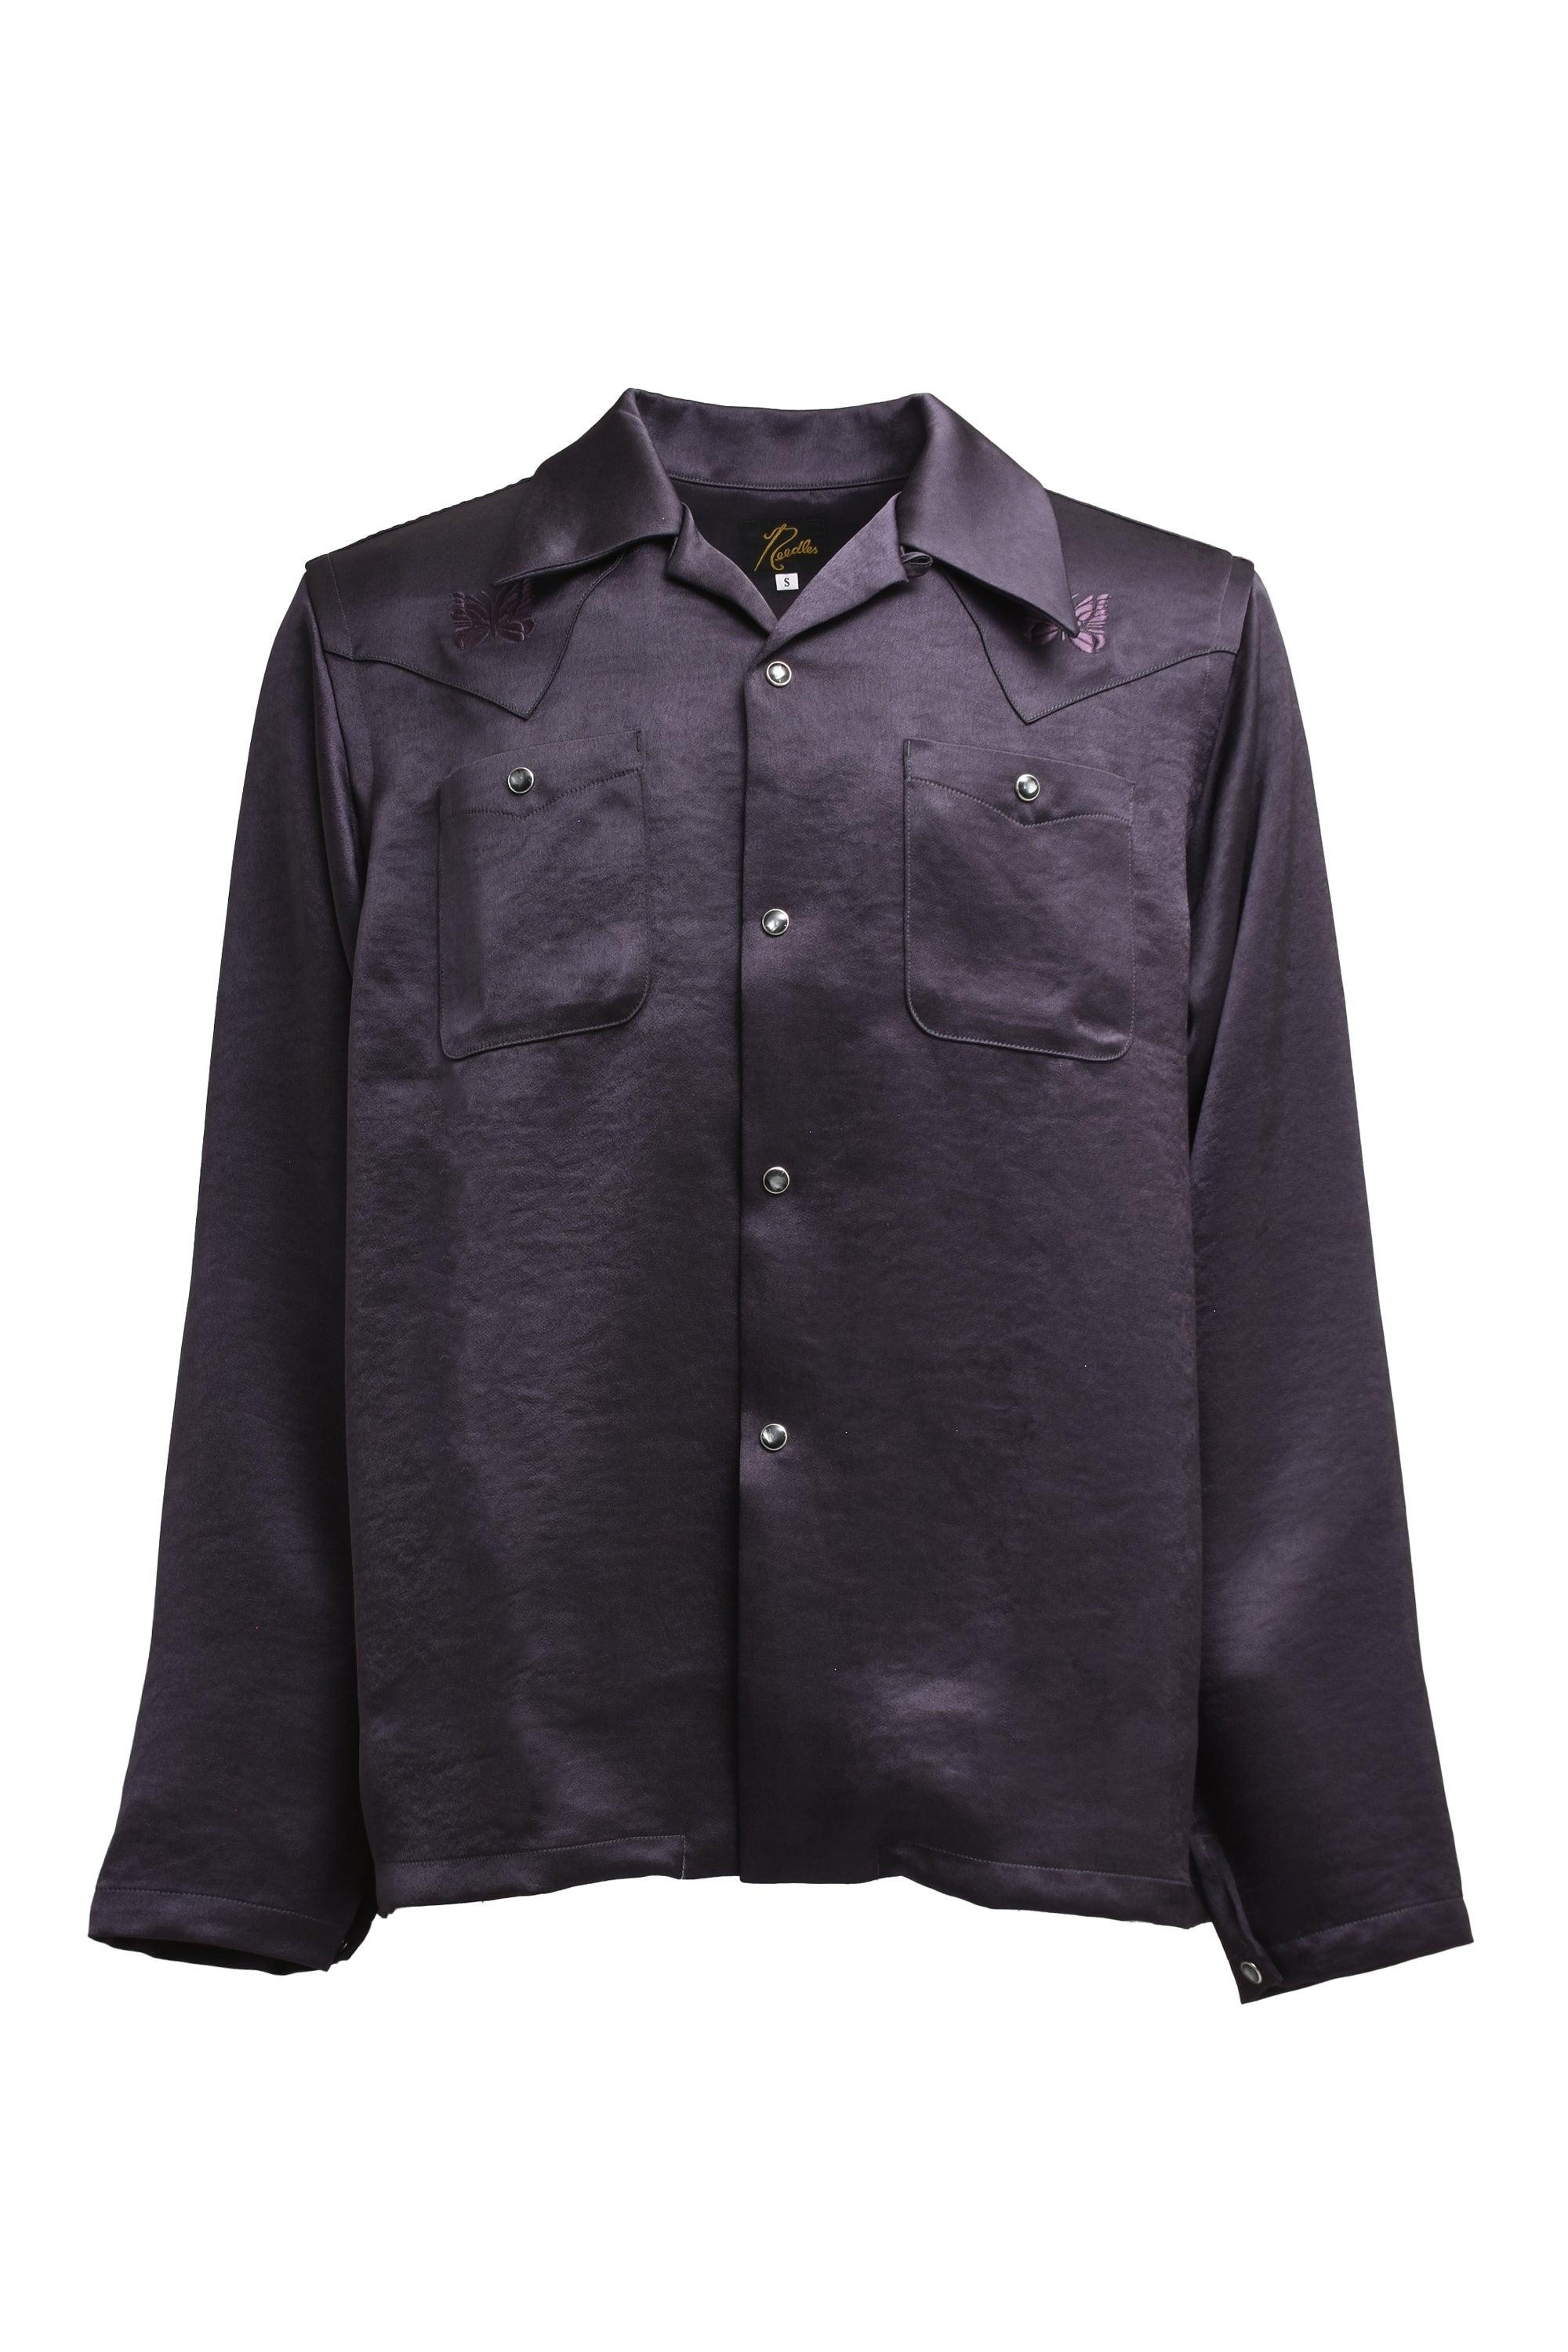 Needles ニードルス SS24 L/S COWBOY ONE-UP SHIRT - POLY 